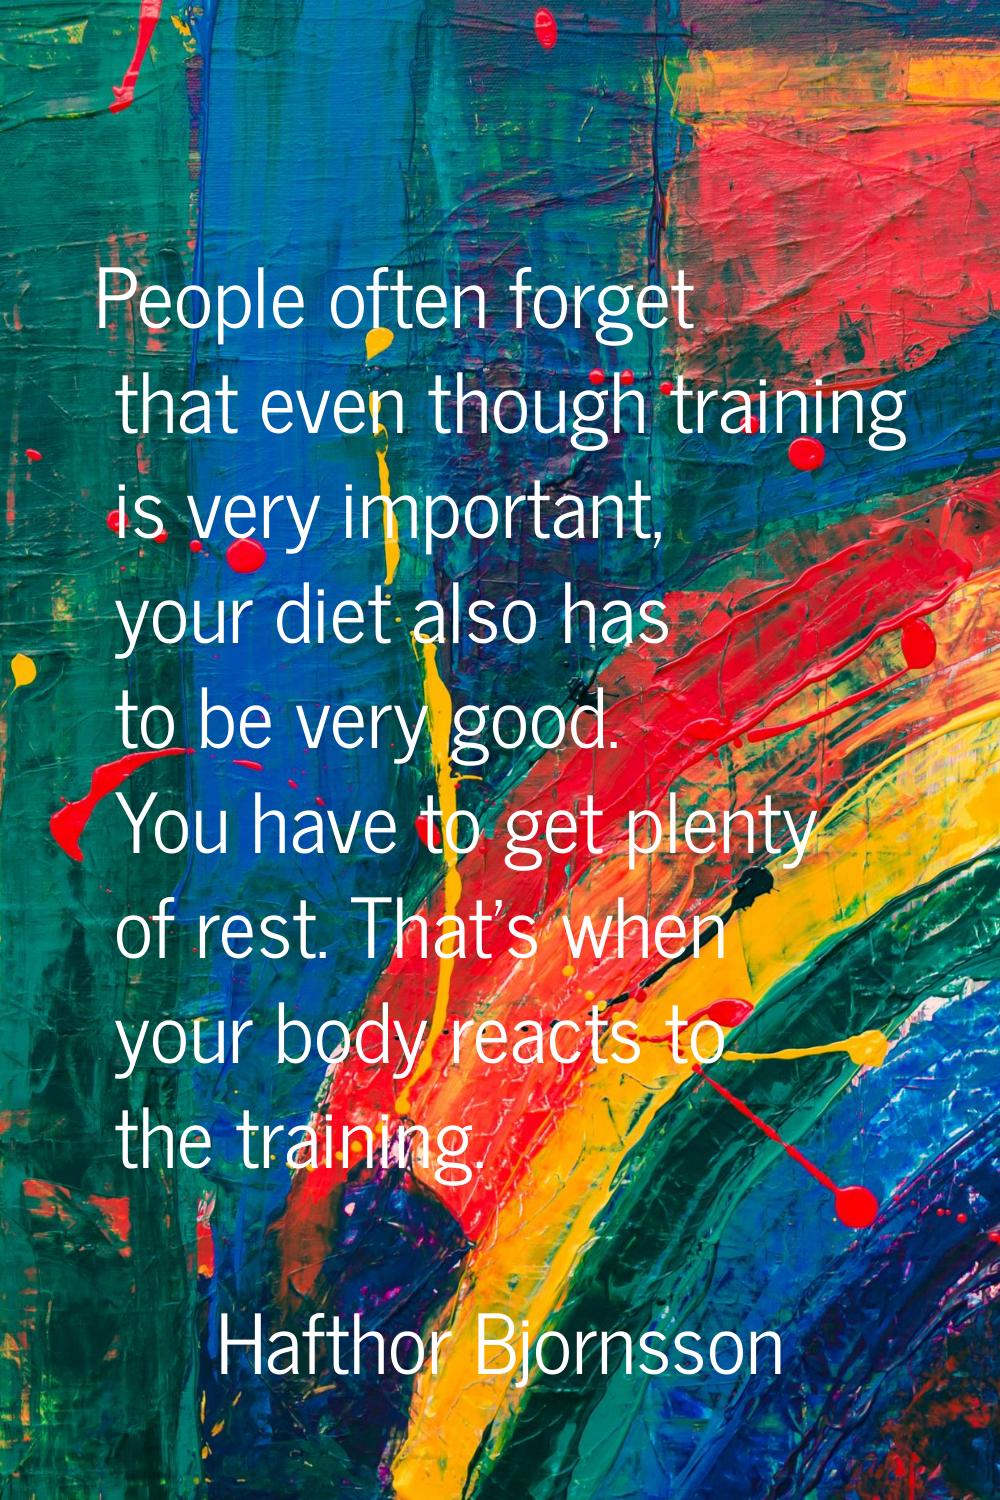 People often forget that even though training is very important, your diet also has to be very good